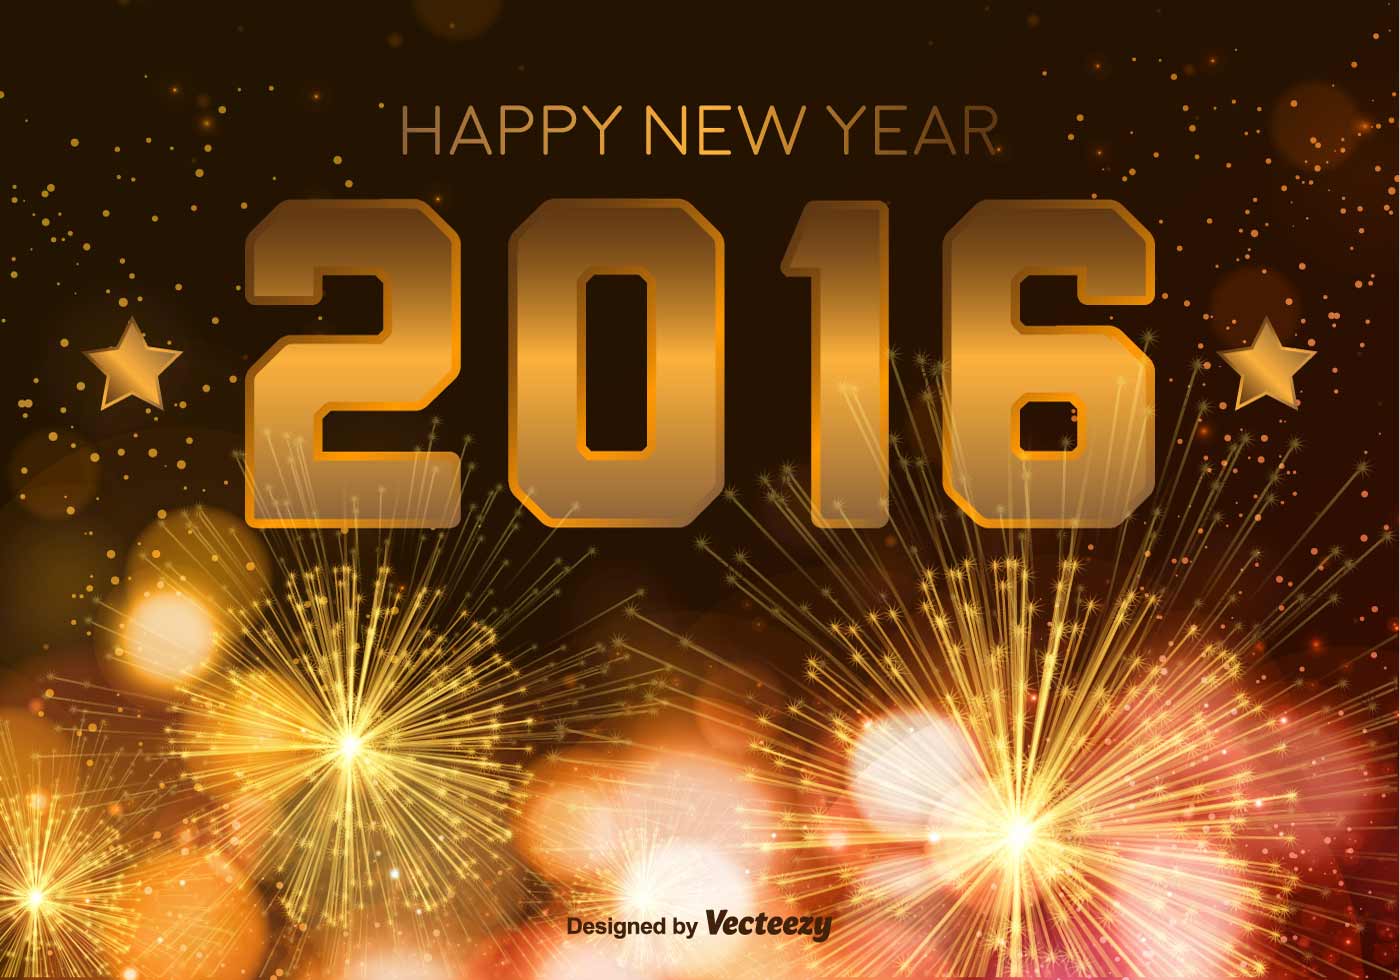 Download Happy New Year 2016 3D Wallpapers   NEW YEARS EVE 2019 1400x980